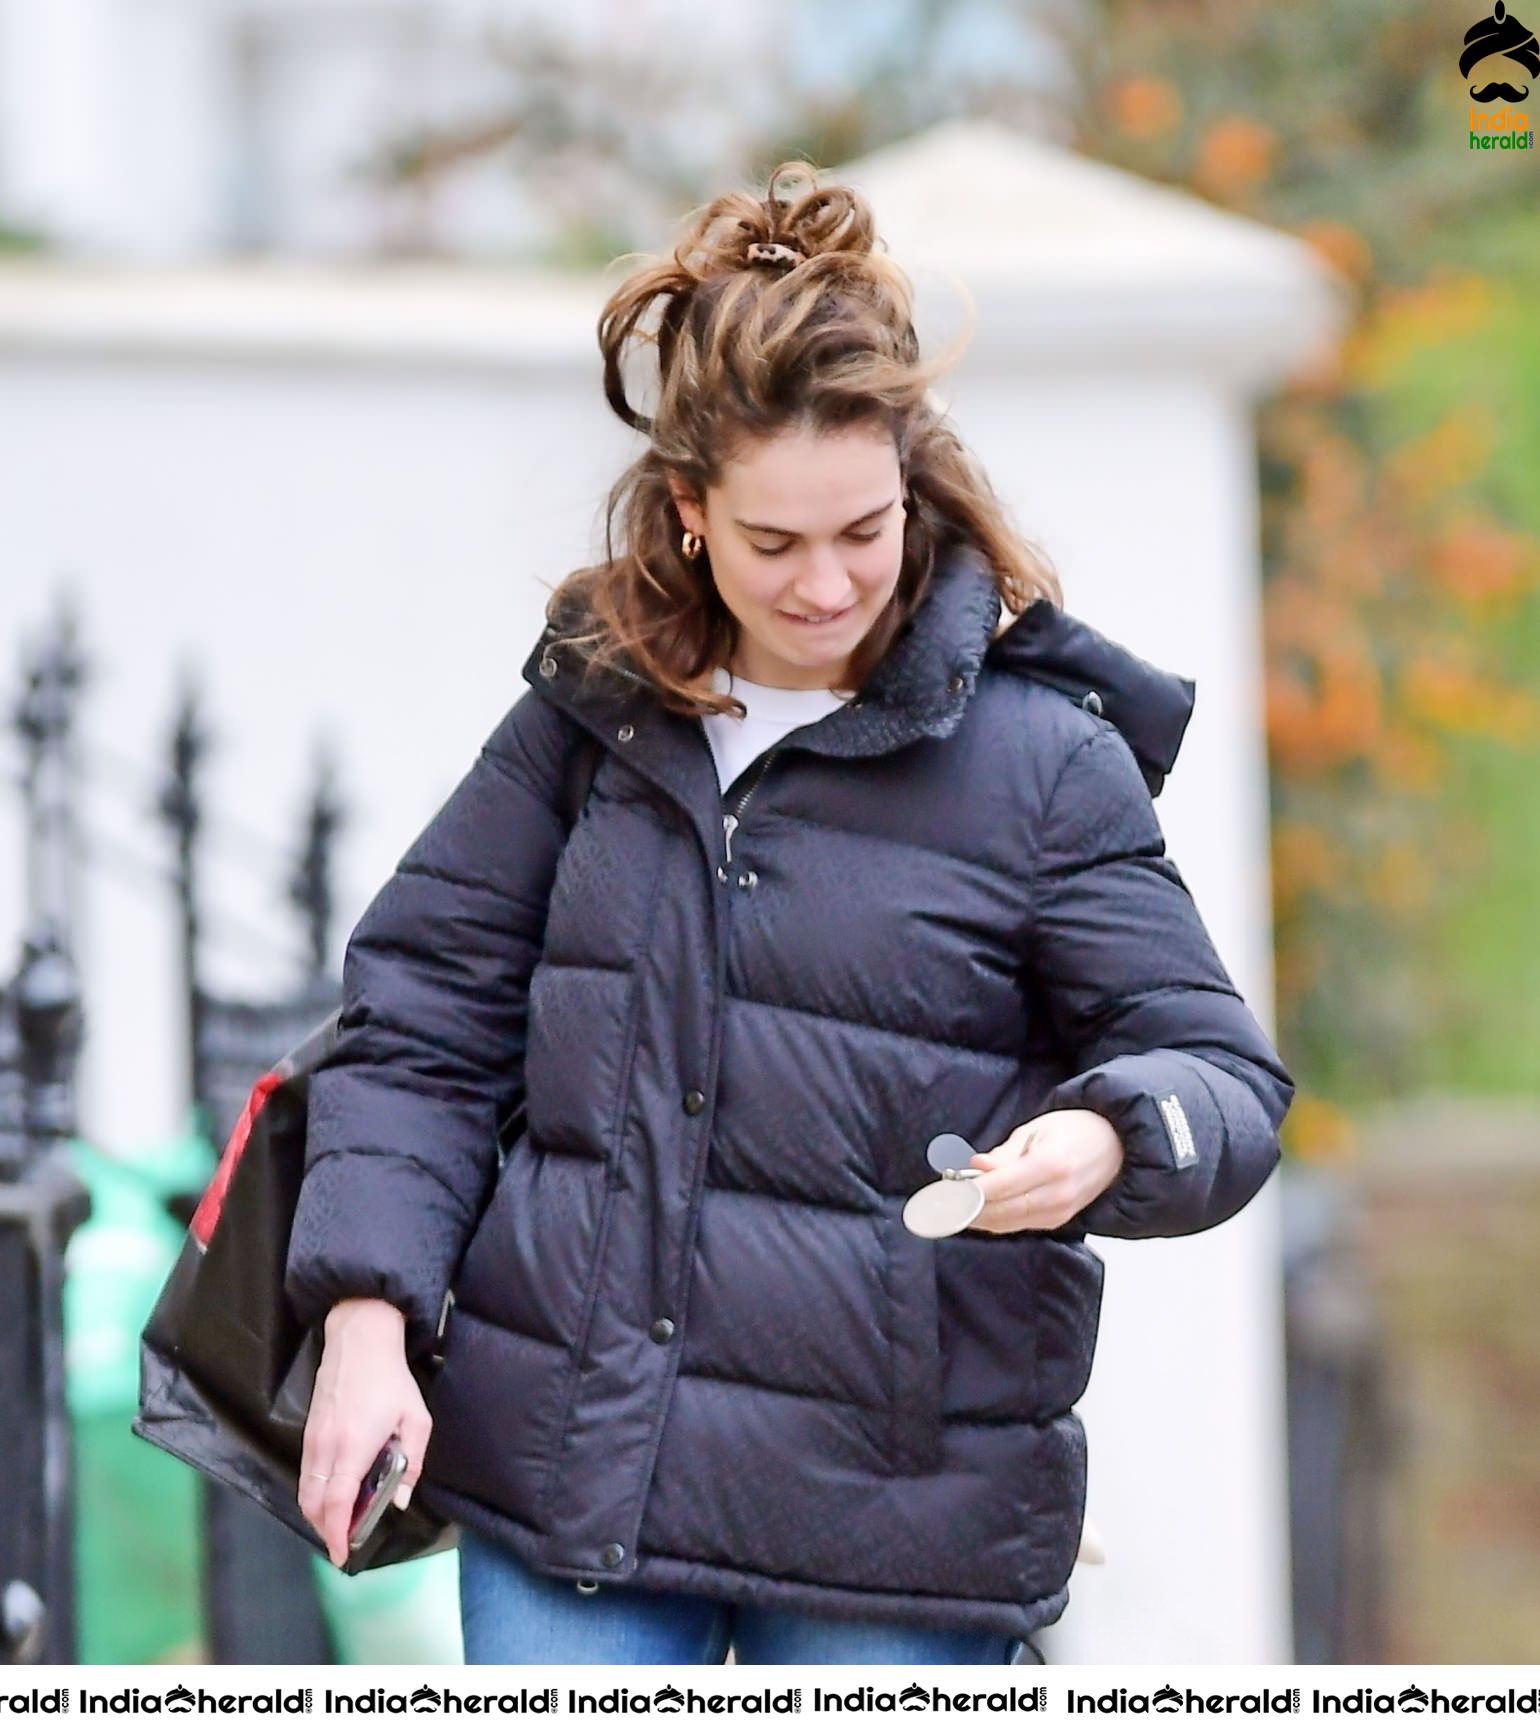 Lily James caught by Paparazzi as she was out in London